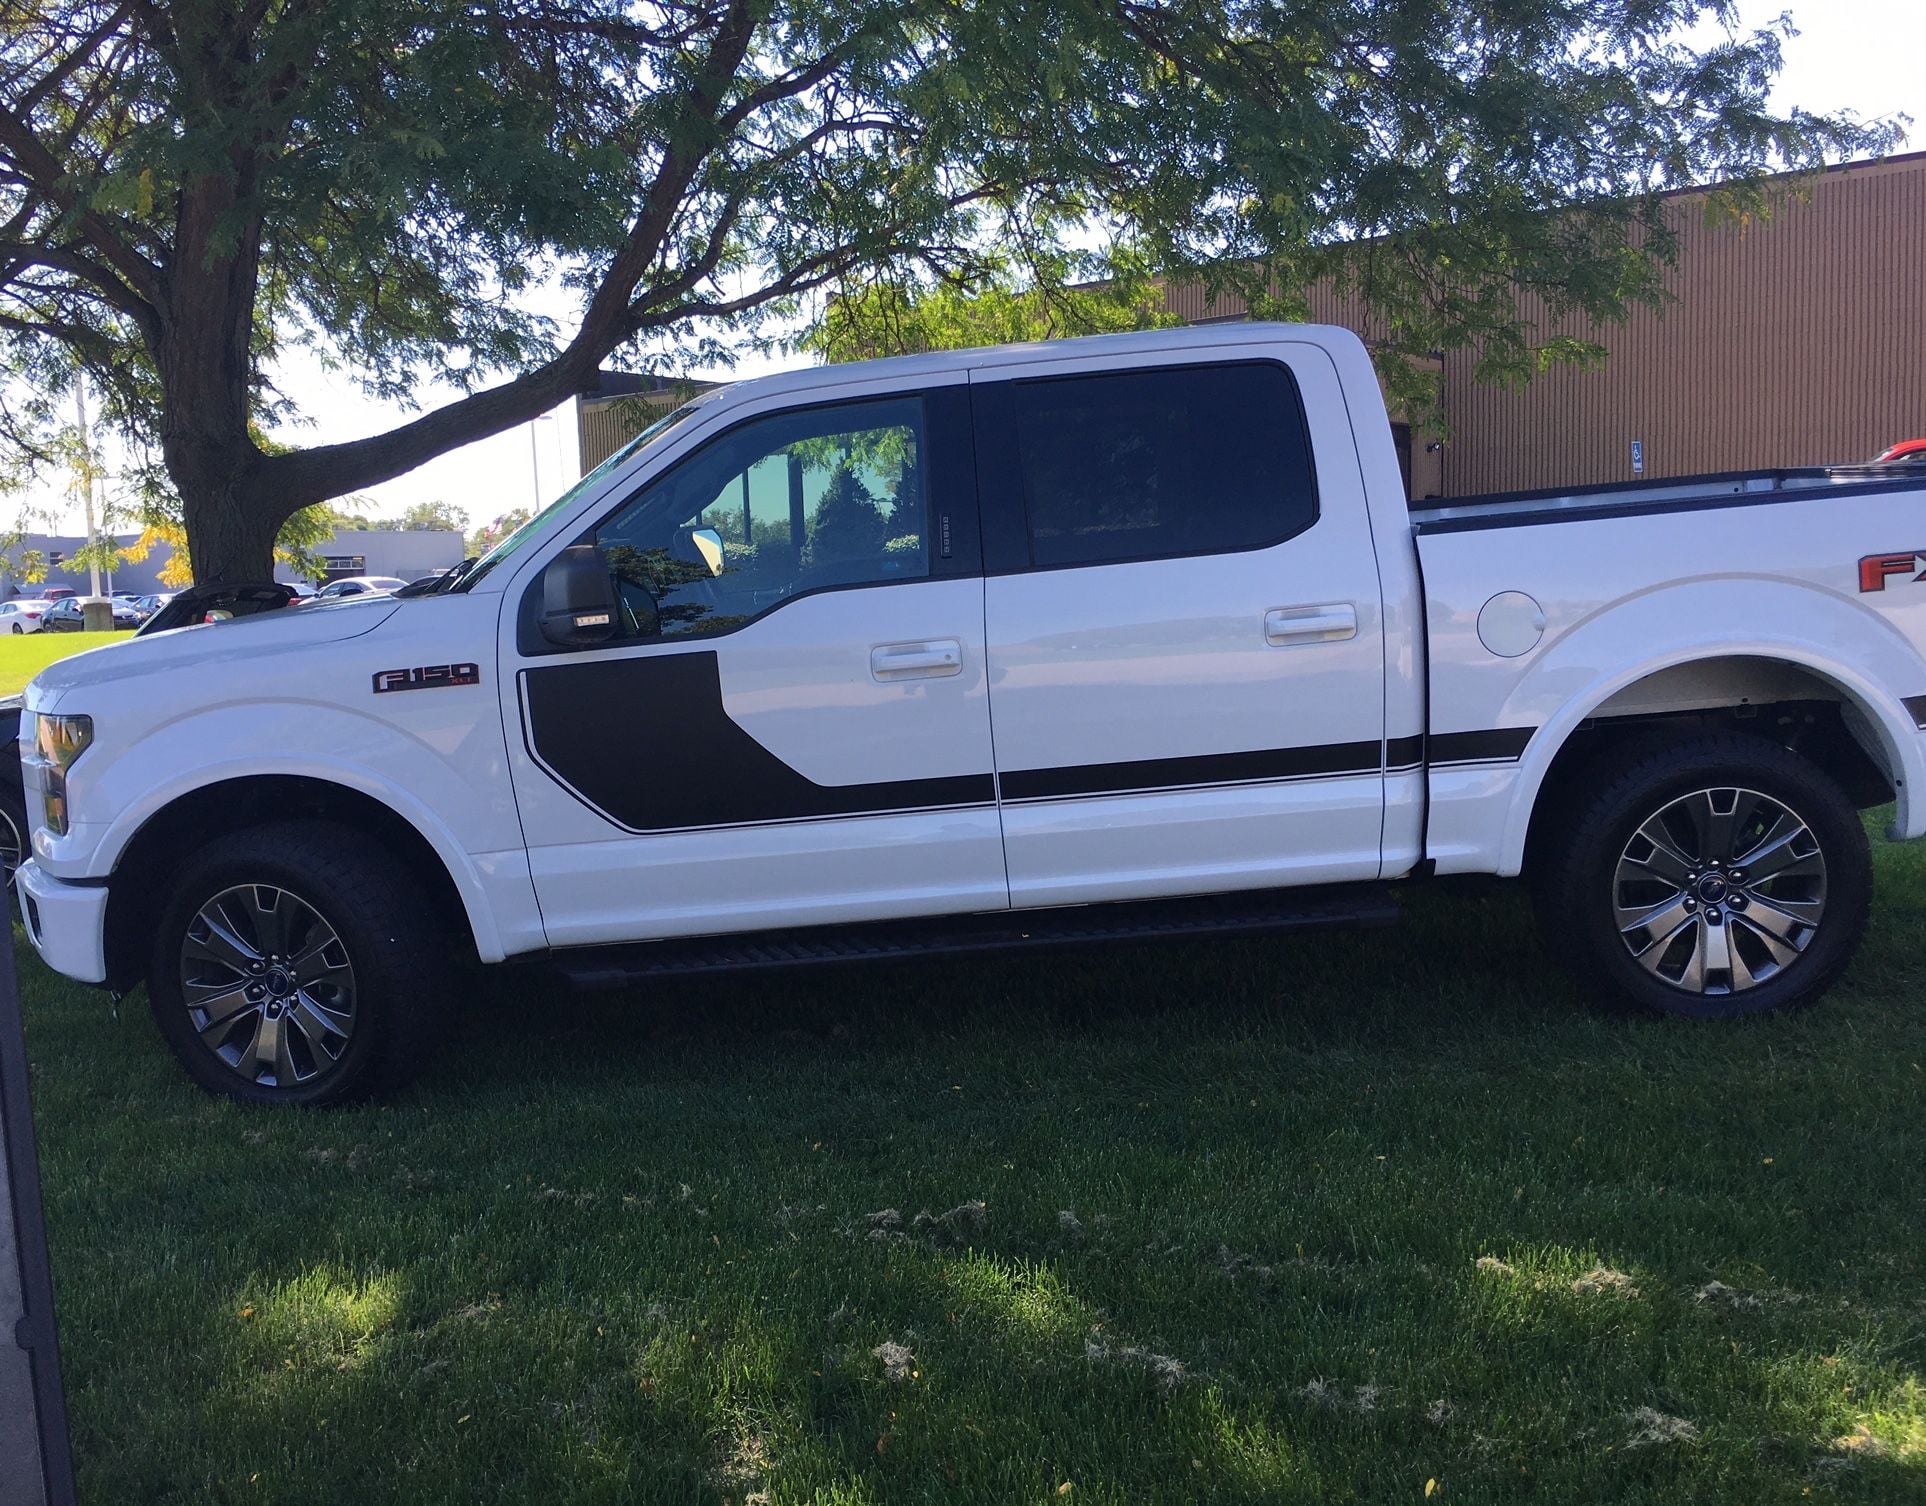 2016 SE Build with OEM Raptor grill - Ford F150 Forum - Community of